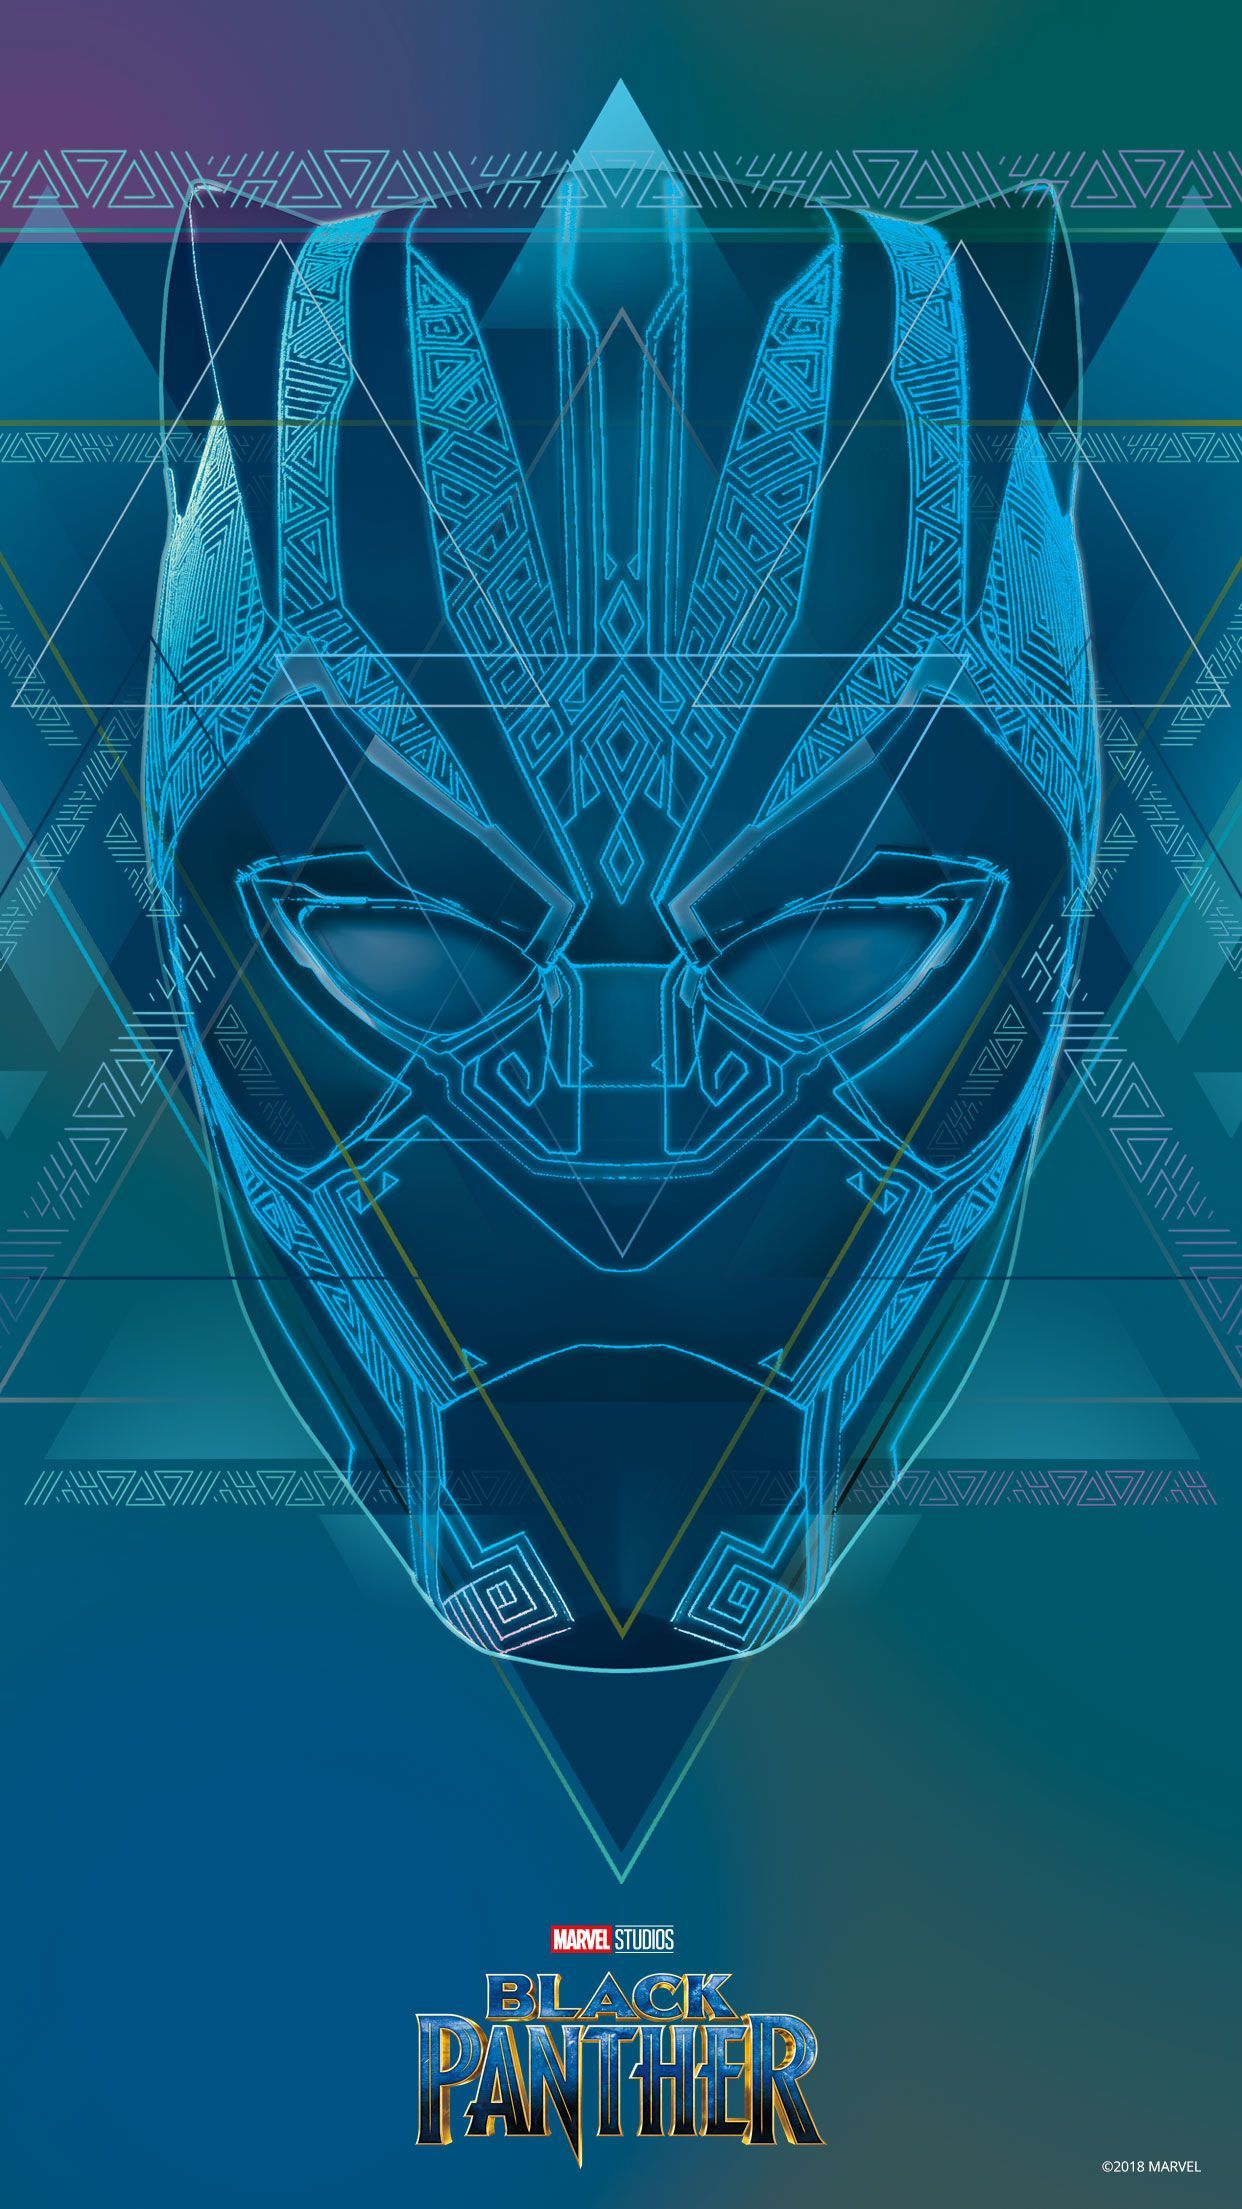 Keep It Slick With These Black Panther Mobile Wallpapers - แบ ล็ ค แพน เธอ ร์ , HD Wallpaper & Backgrounds